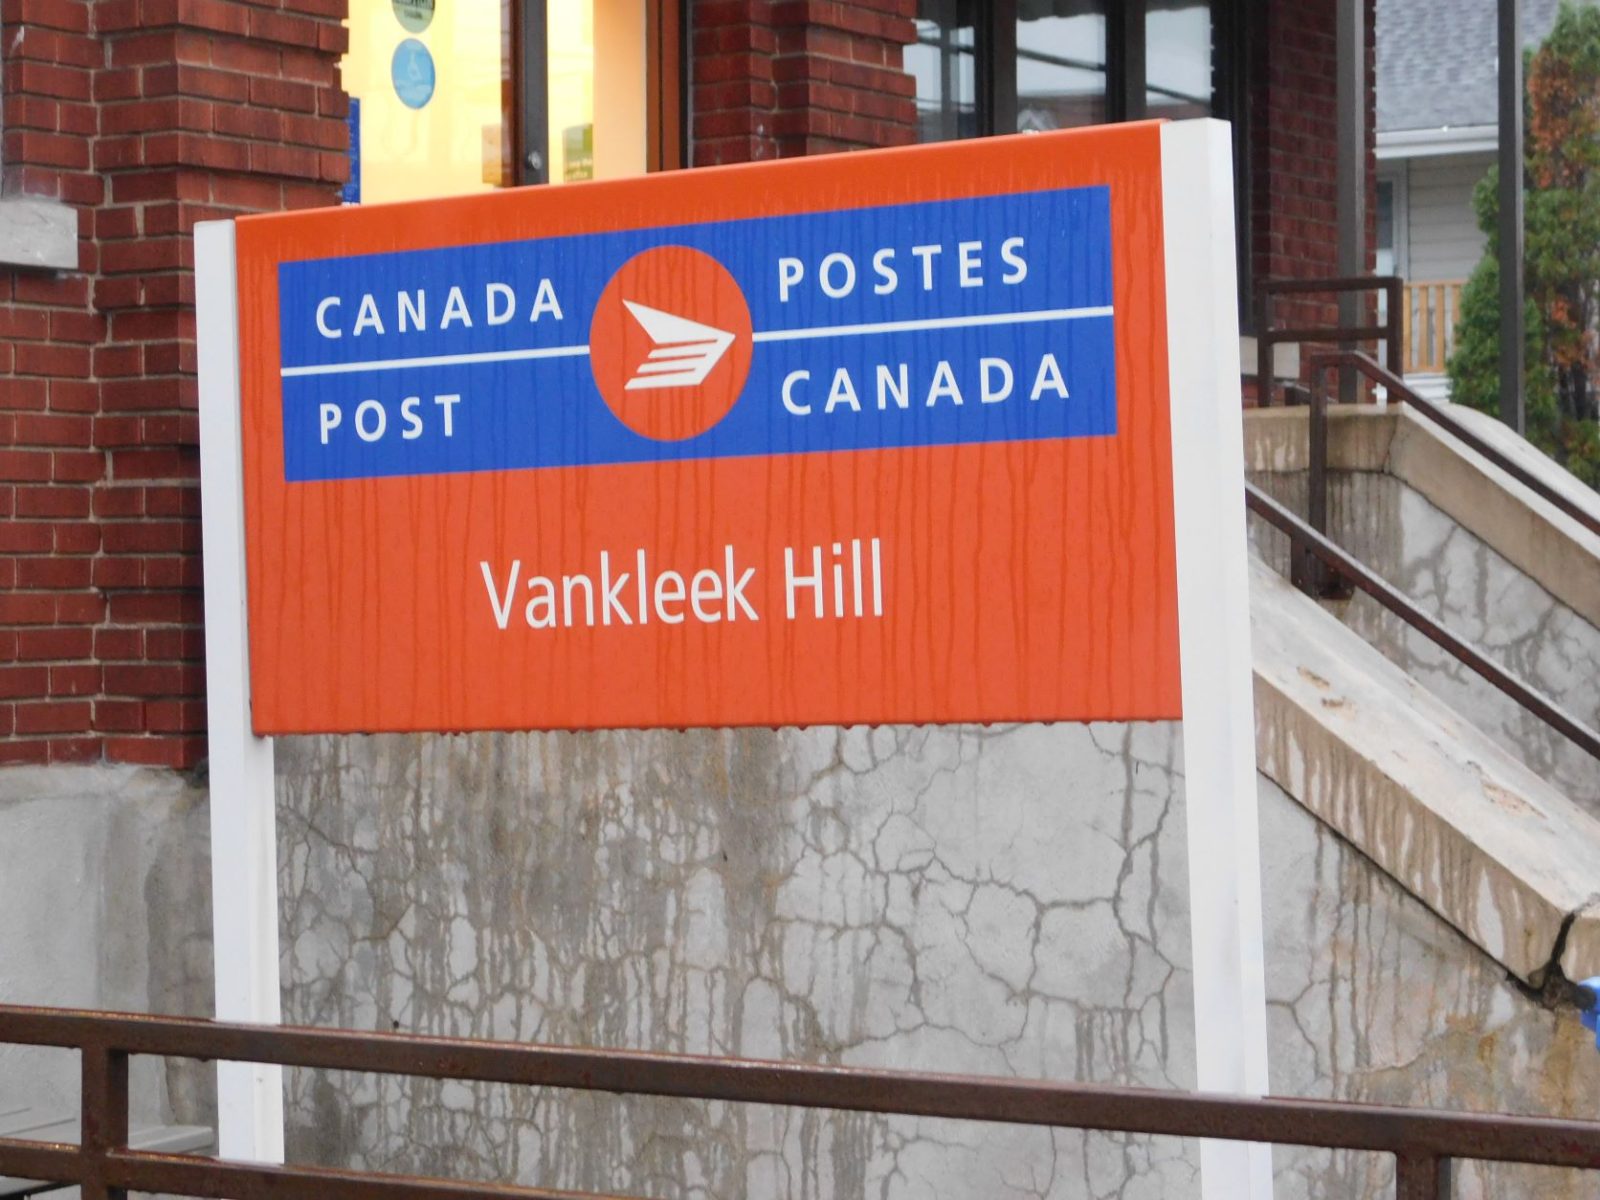 Mail stolen from Canada Post found